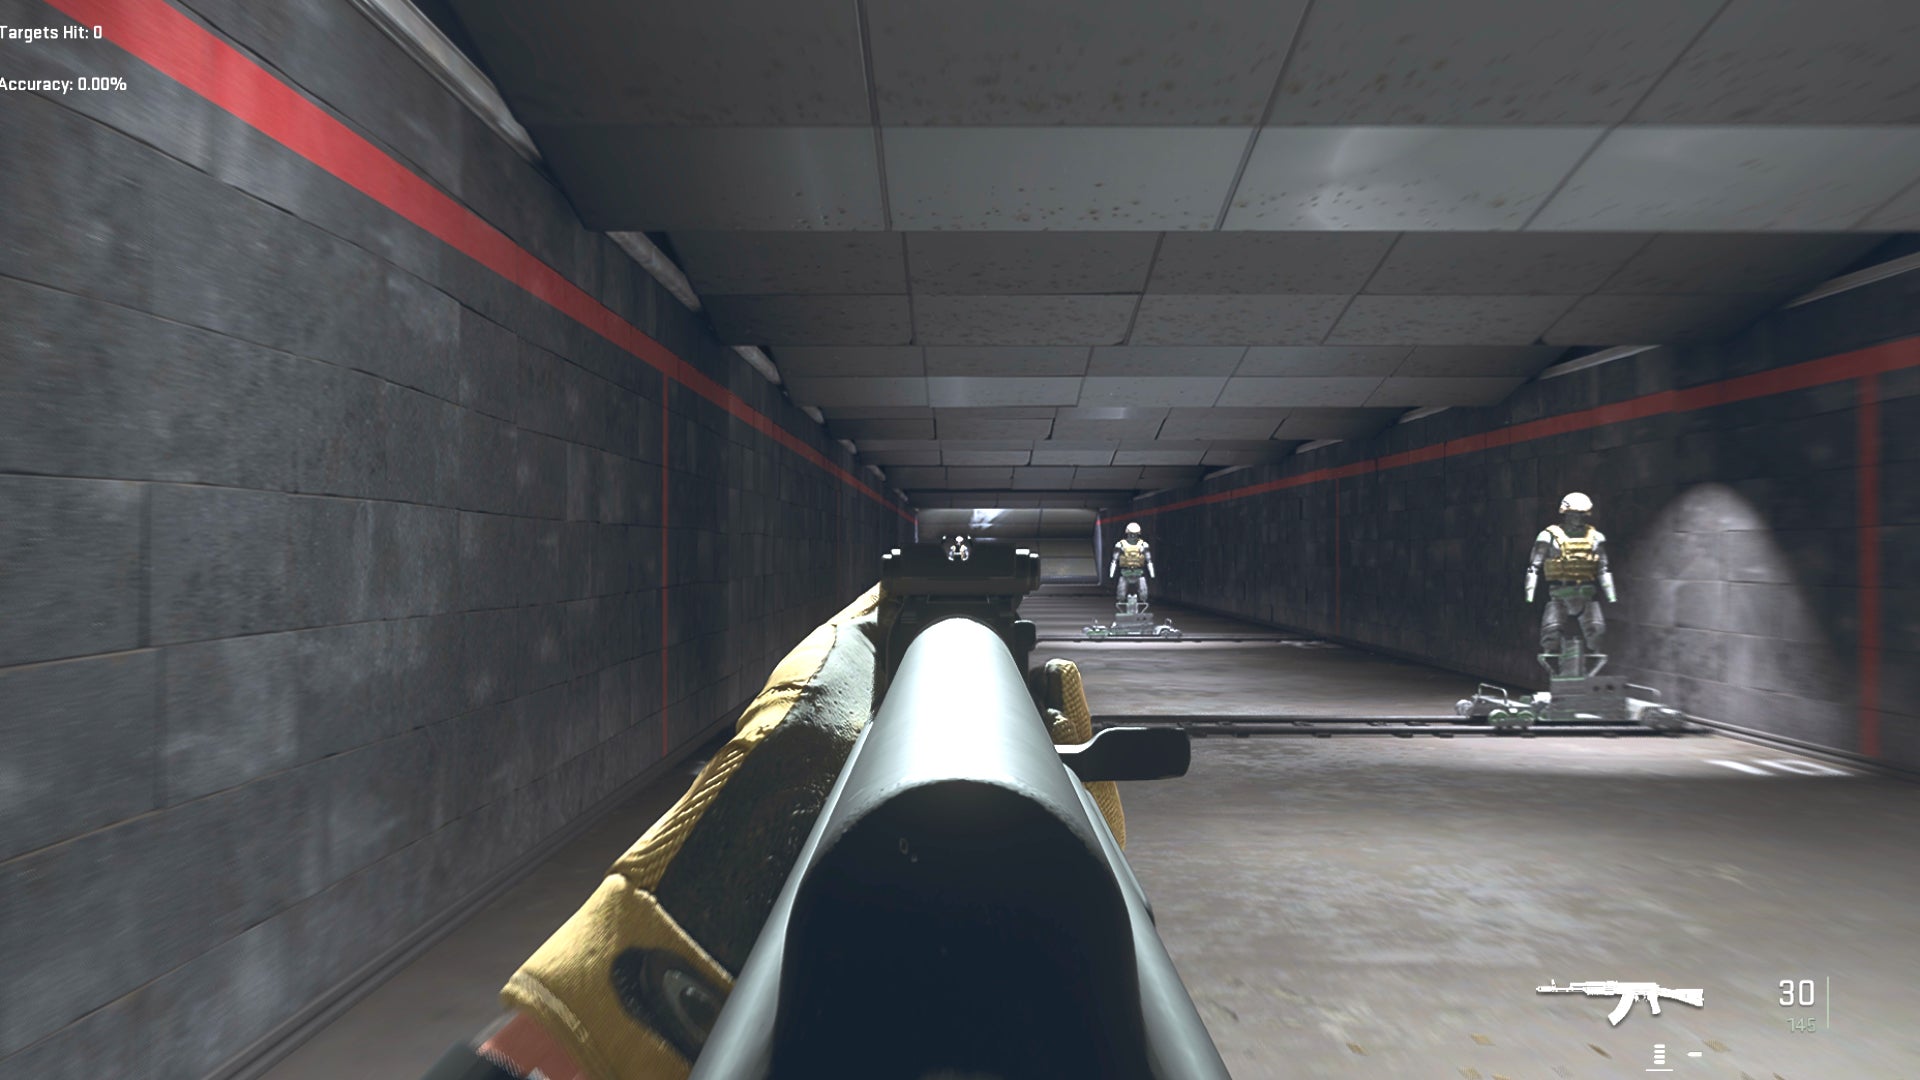 The player in Warzone 2.0 aims at a training dummy with the Kastov 762 ironsights.